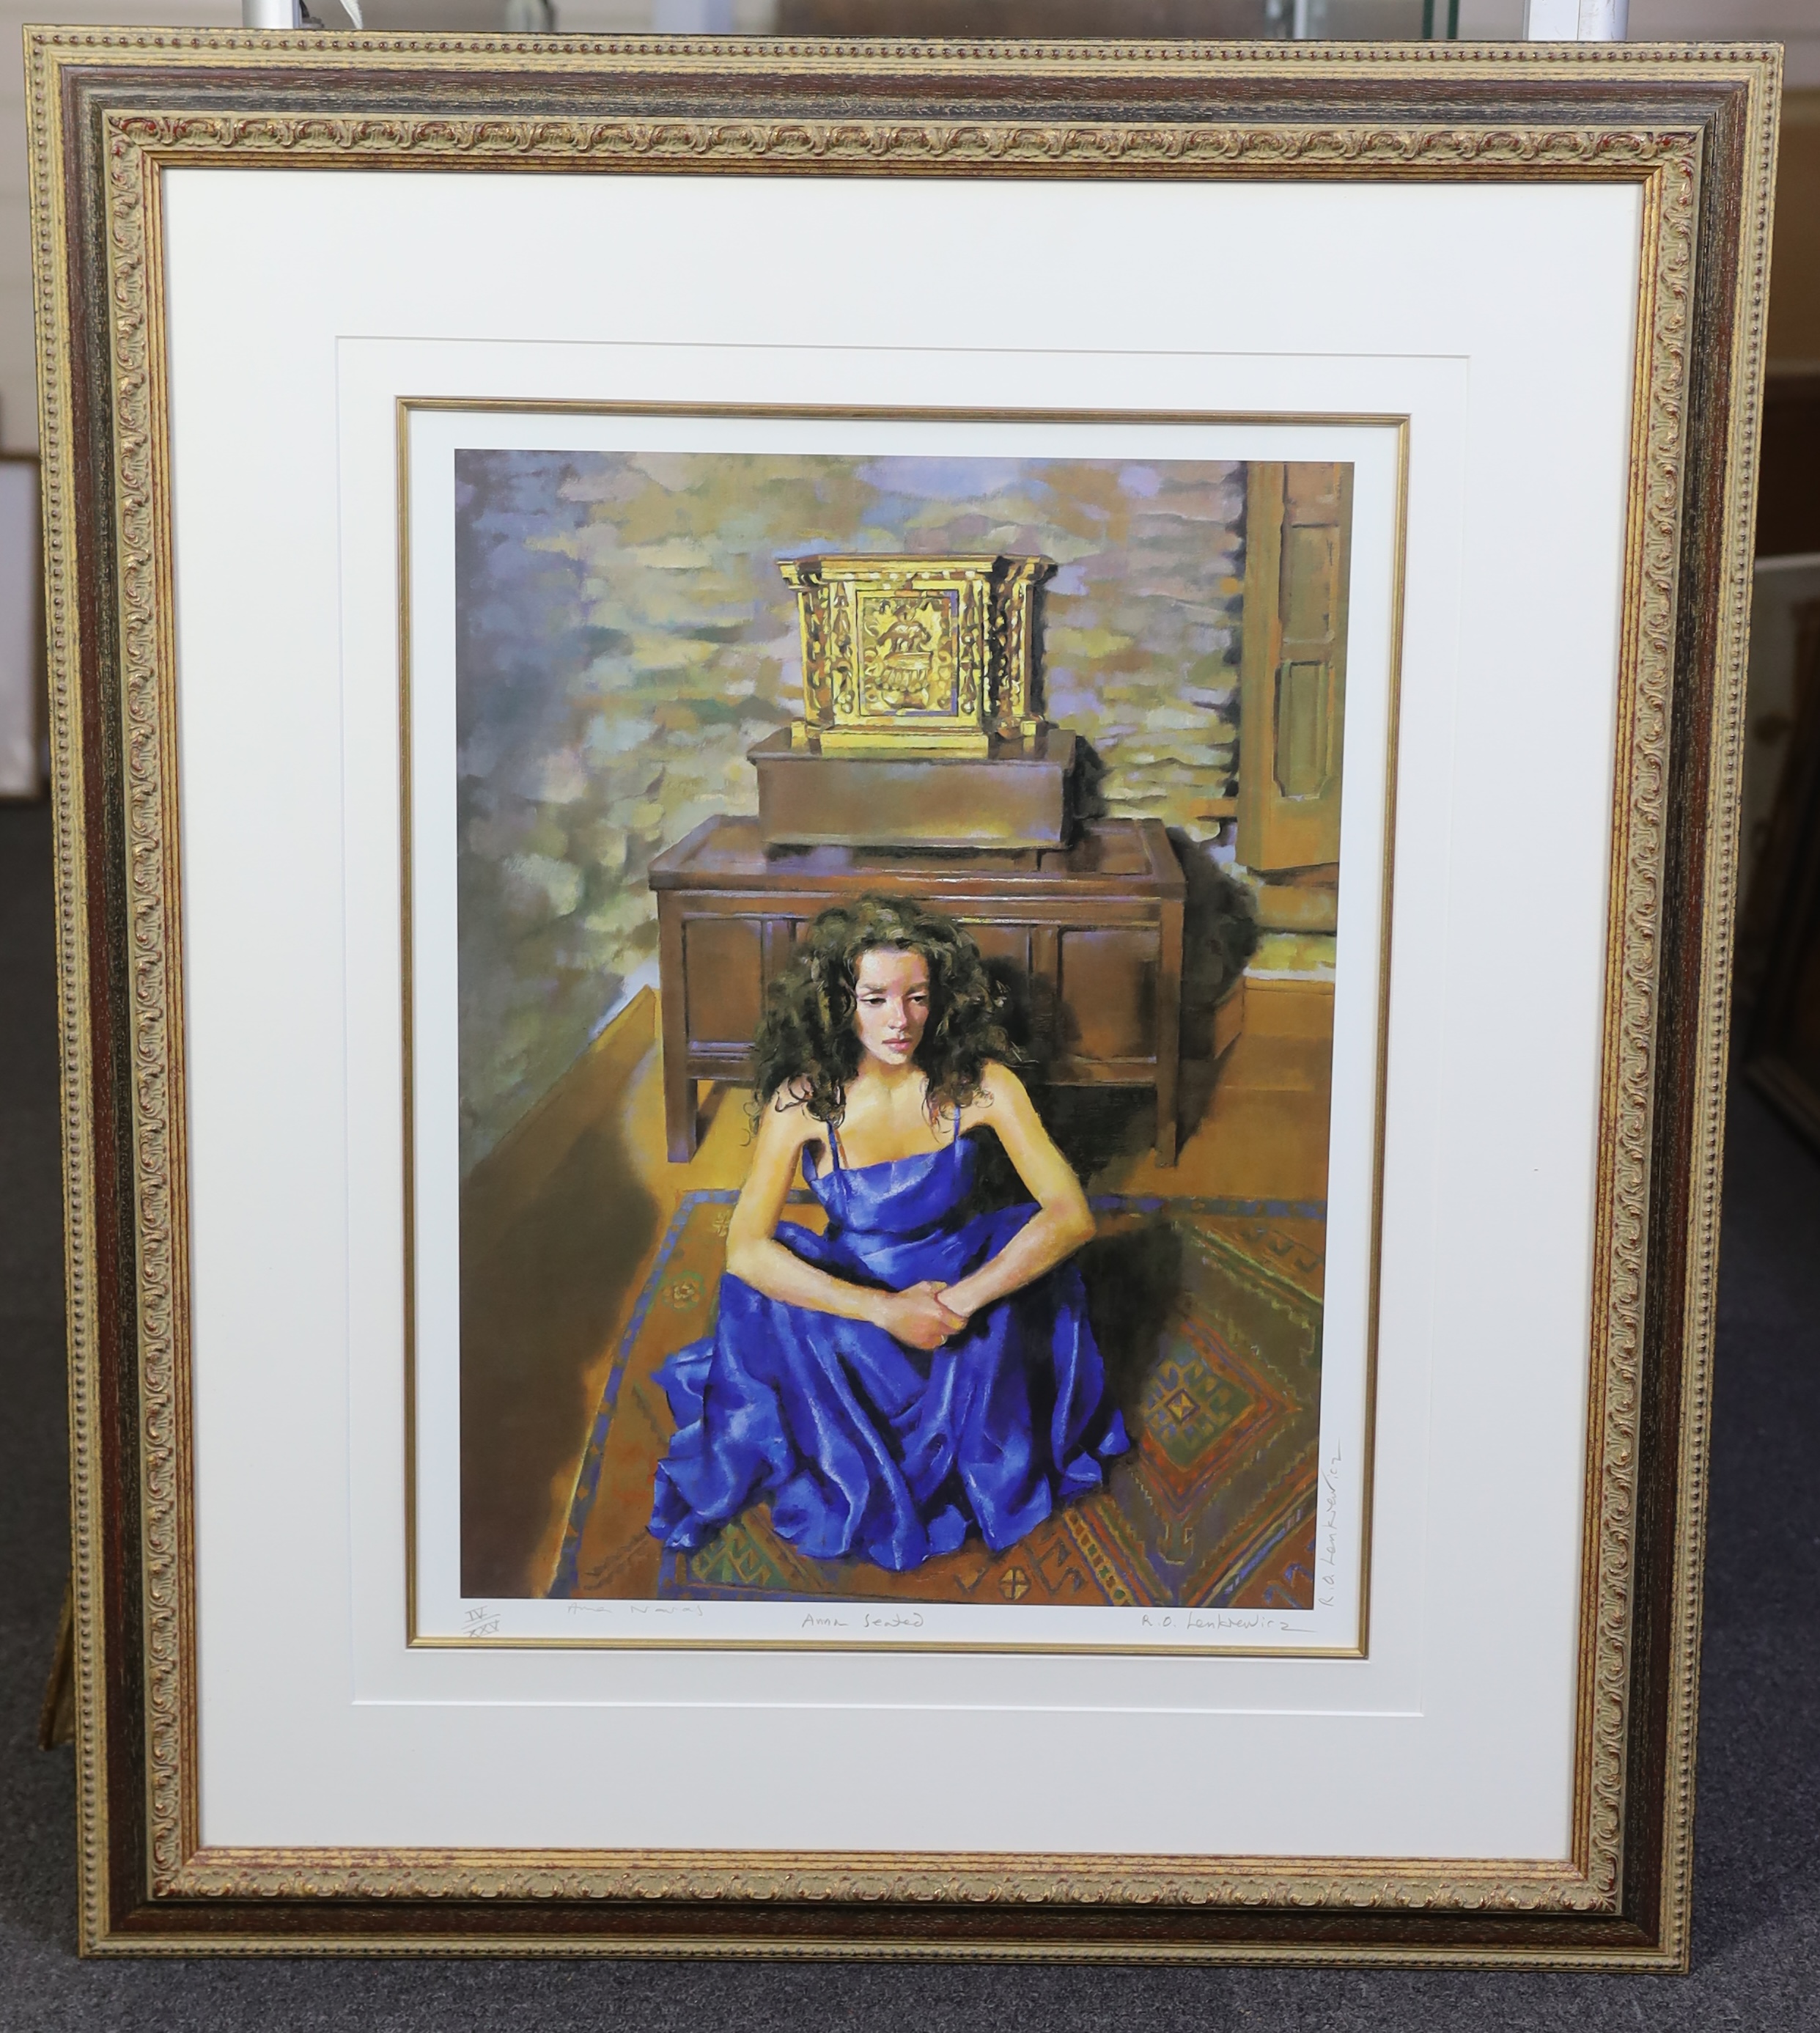 Robert Lenkiewicz (1941-2002), artist proof lithograph, 'Anna seated' (Millenium Edition), no.1V/XXV signed in pencil, titled and inscribed Anna Navas, 52 x 39cm. Condition - good